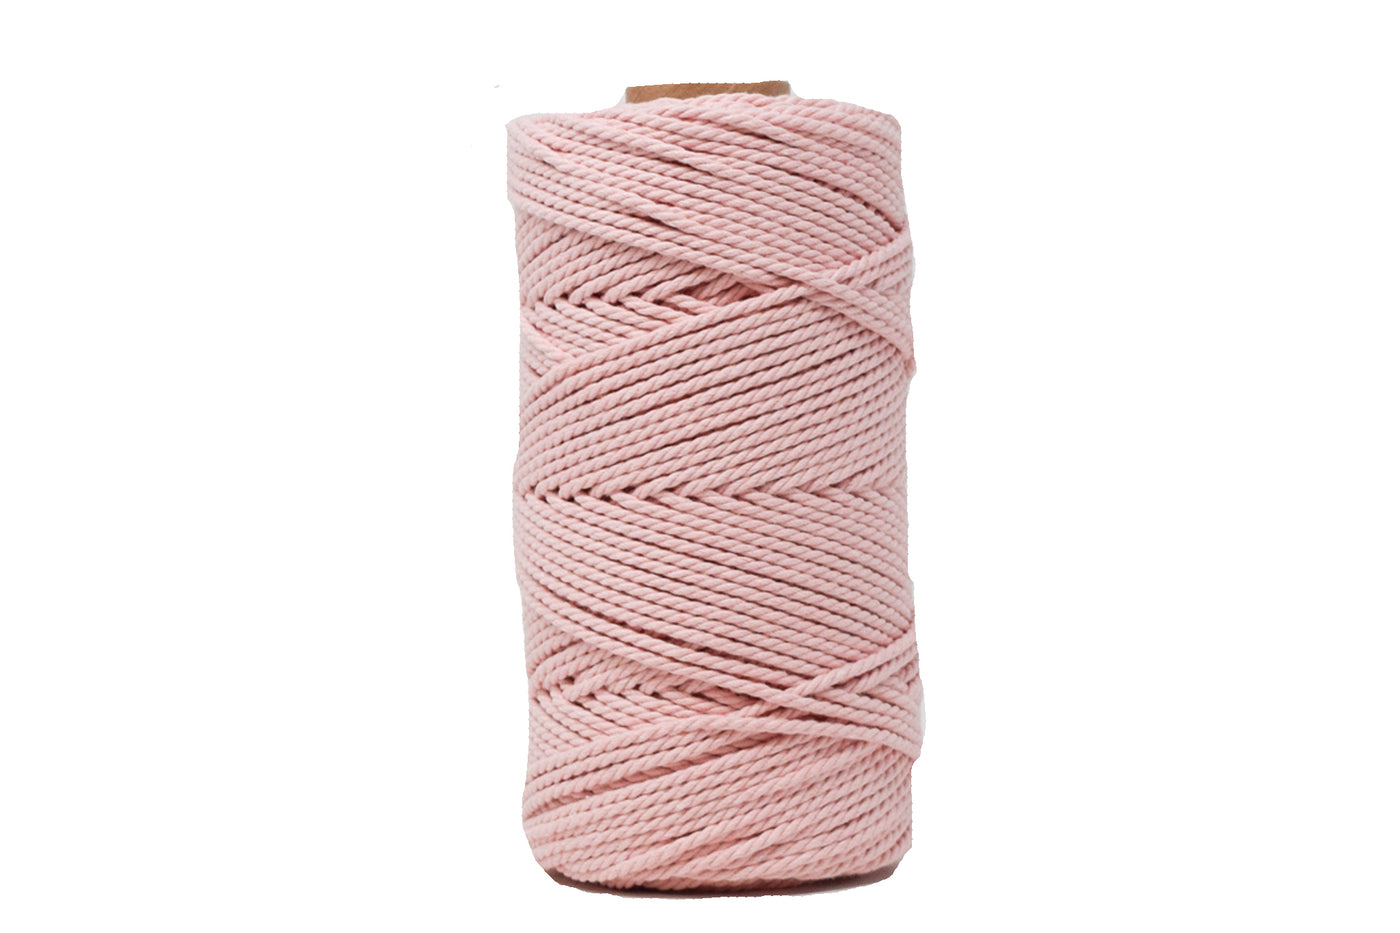 COTTON ROPE ZERO WASTE 2 MM - 3 PLY - CHERRY BLOSSOM COLOR